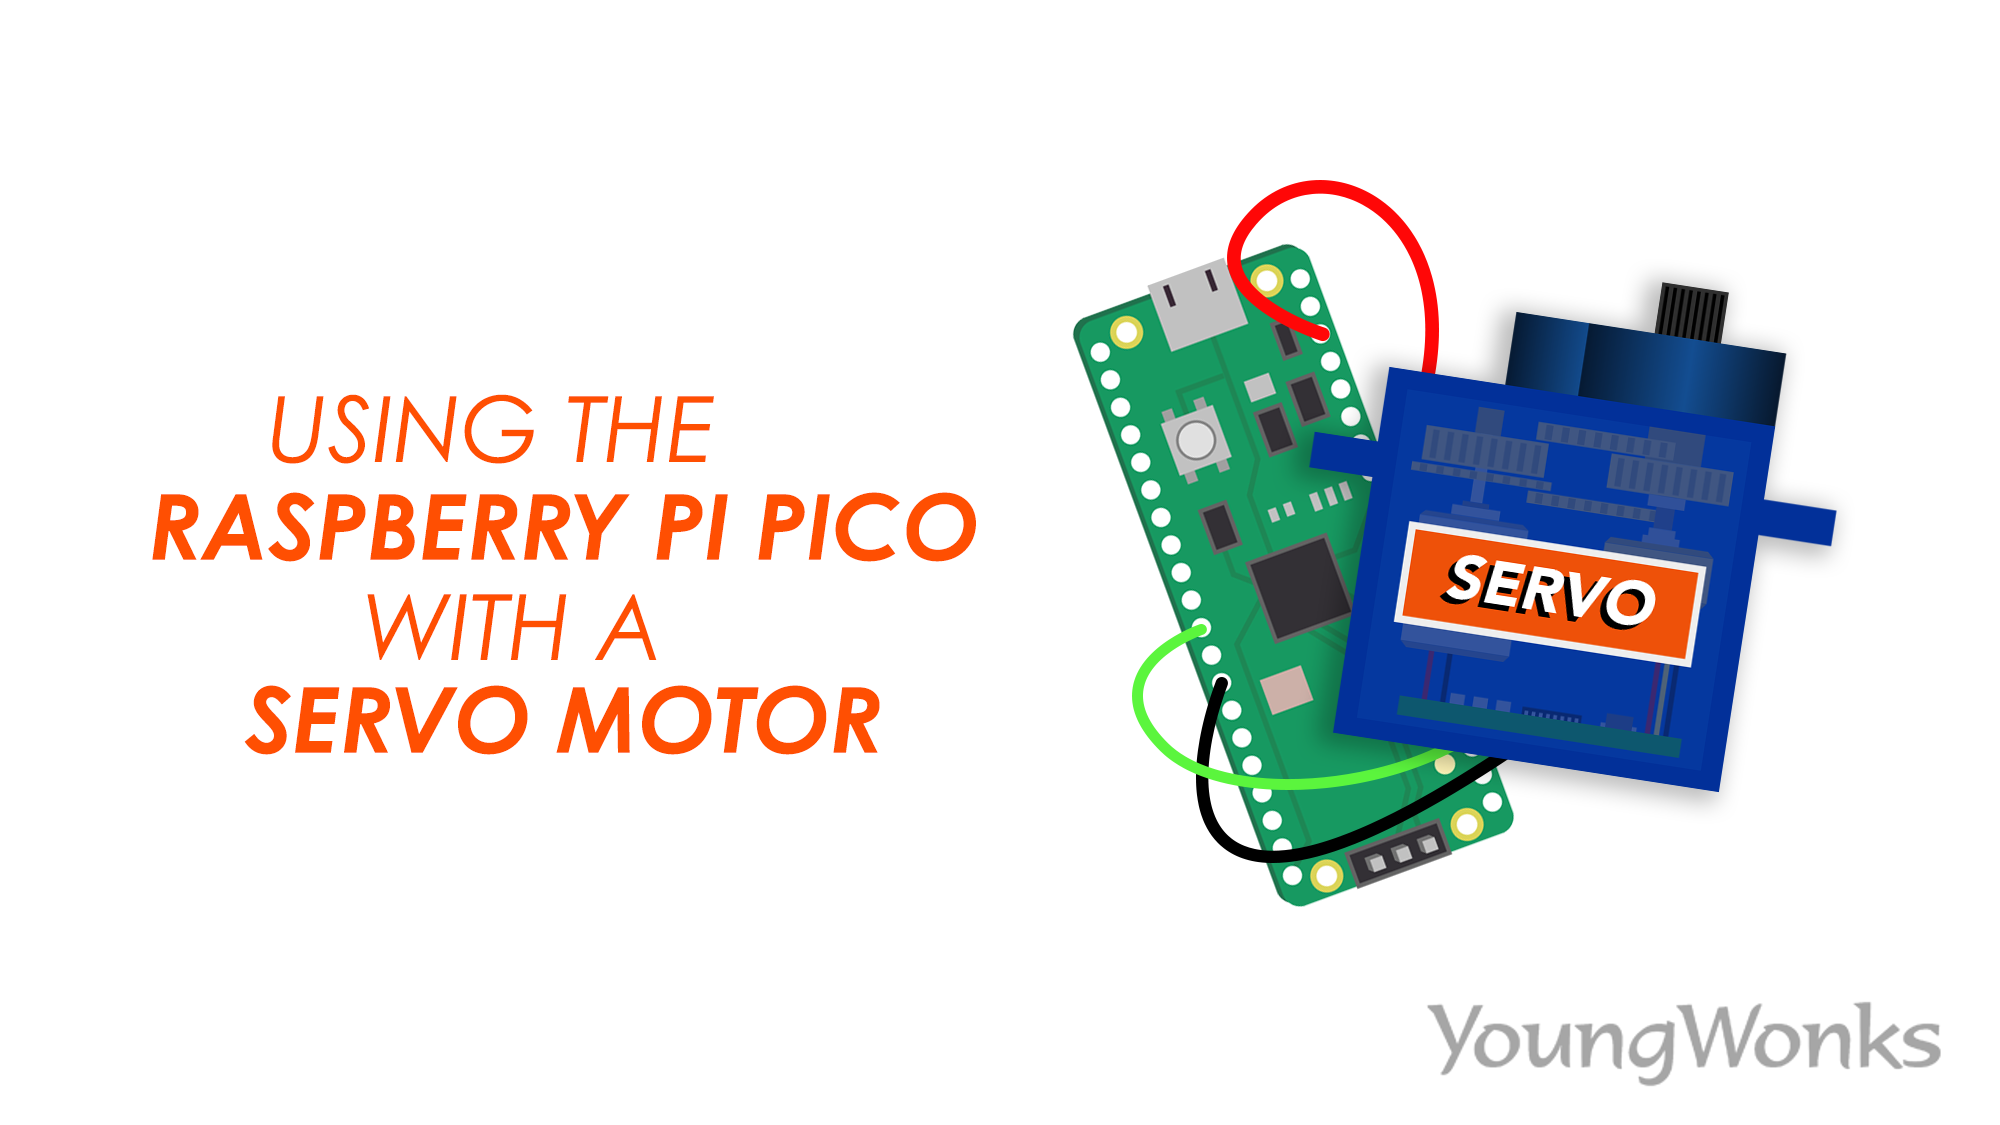 How Servo Motor Works & Interface It With Arduino - Last Minute